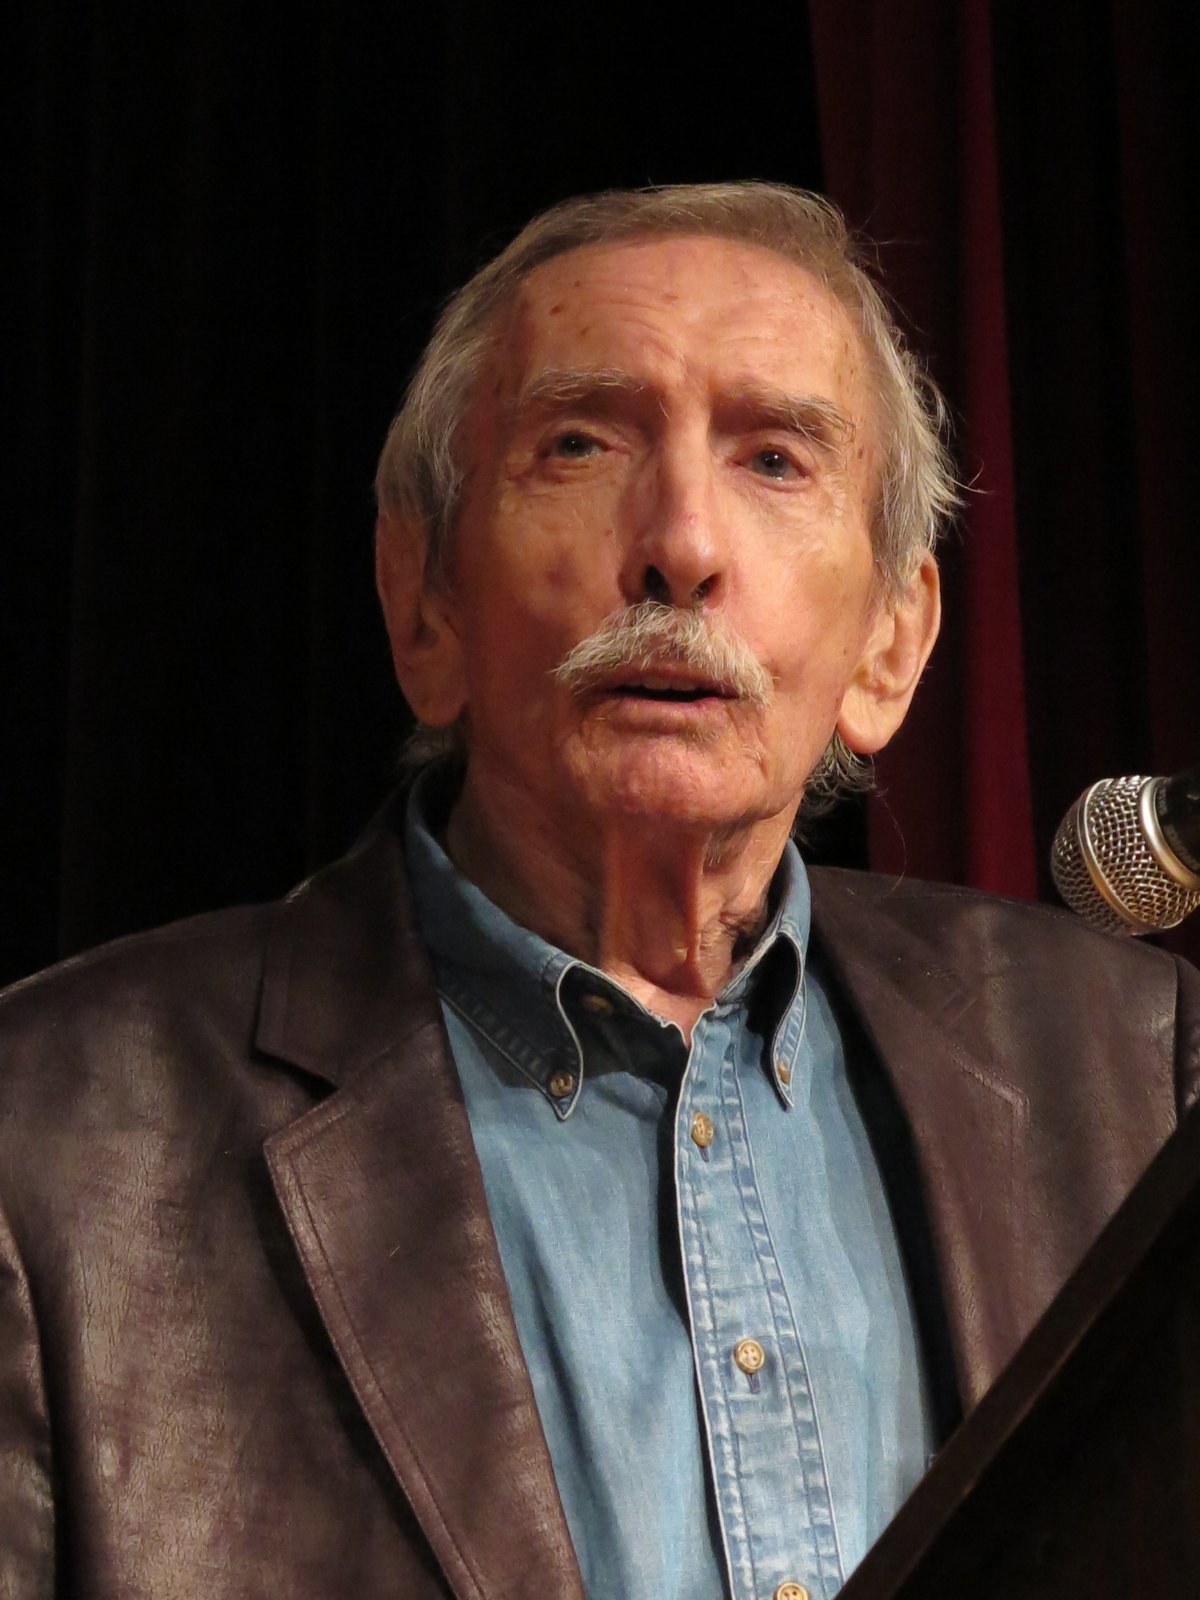 Edward Albee speaking at the Players Club in Gramercy in September 2012 during the induction of legendary theater critic Jerry Tallmer into the club’s hall of fame. Photo by Jonathan Slaff